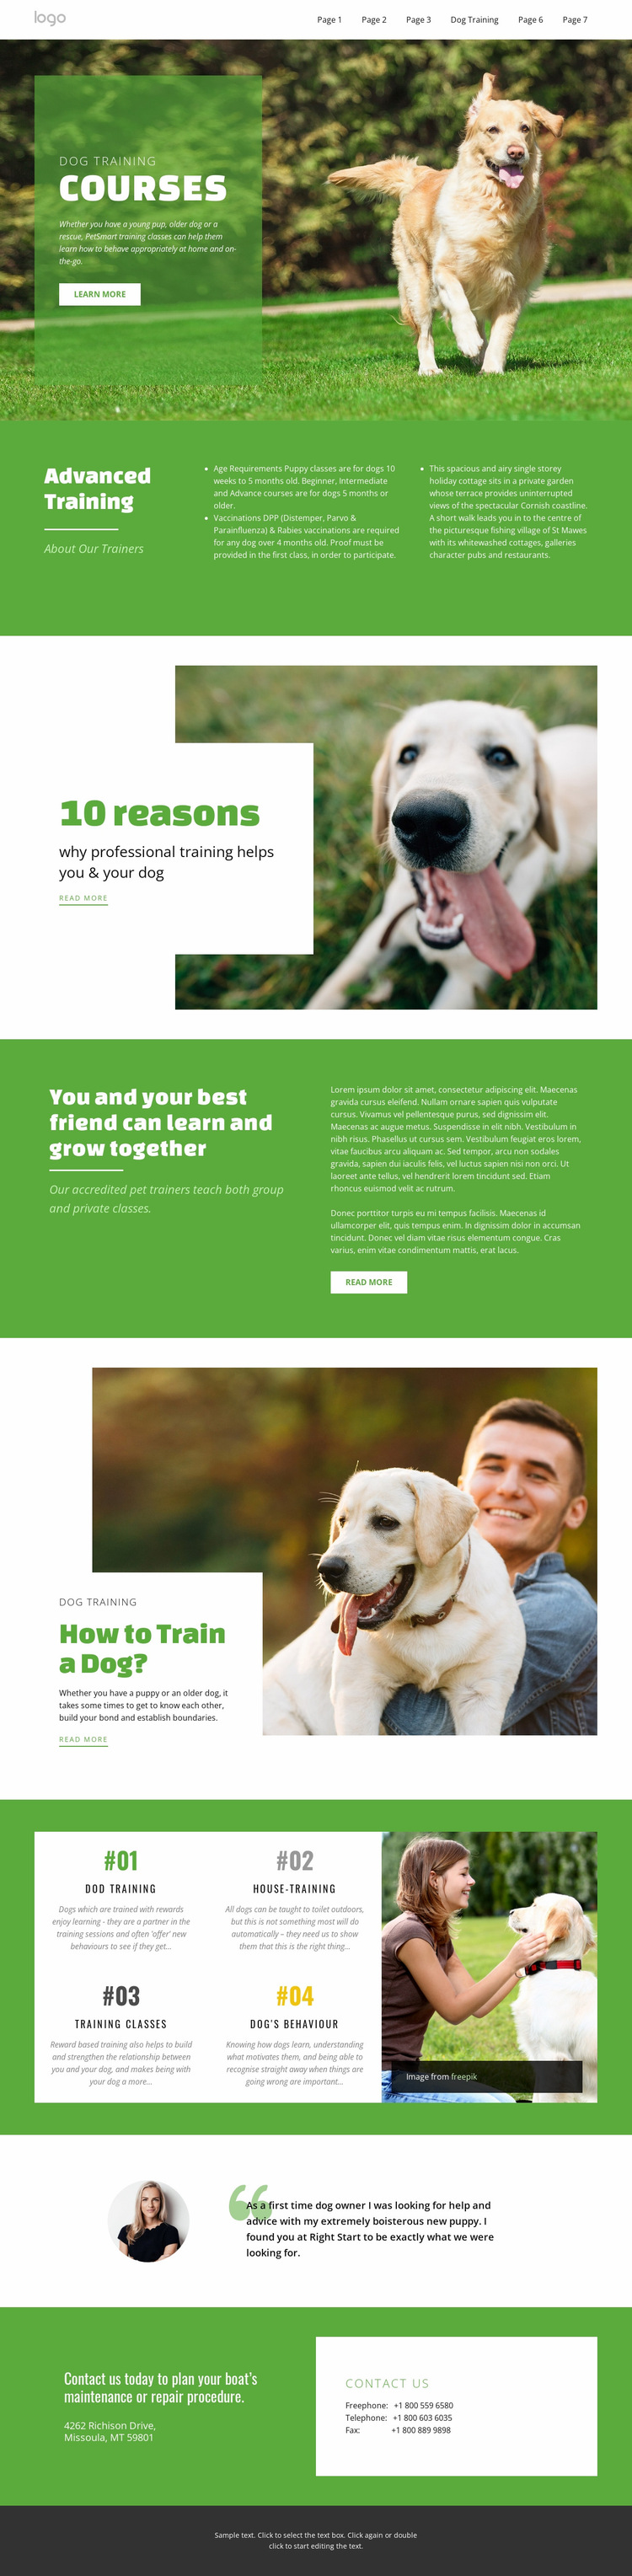 Training courses for pets Website Builder Templates